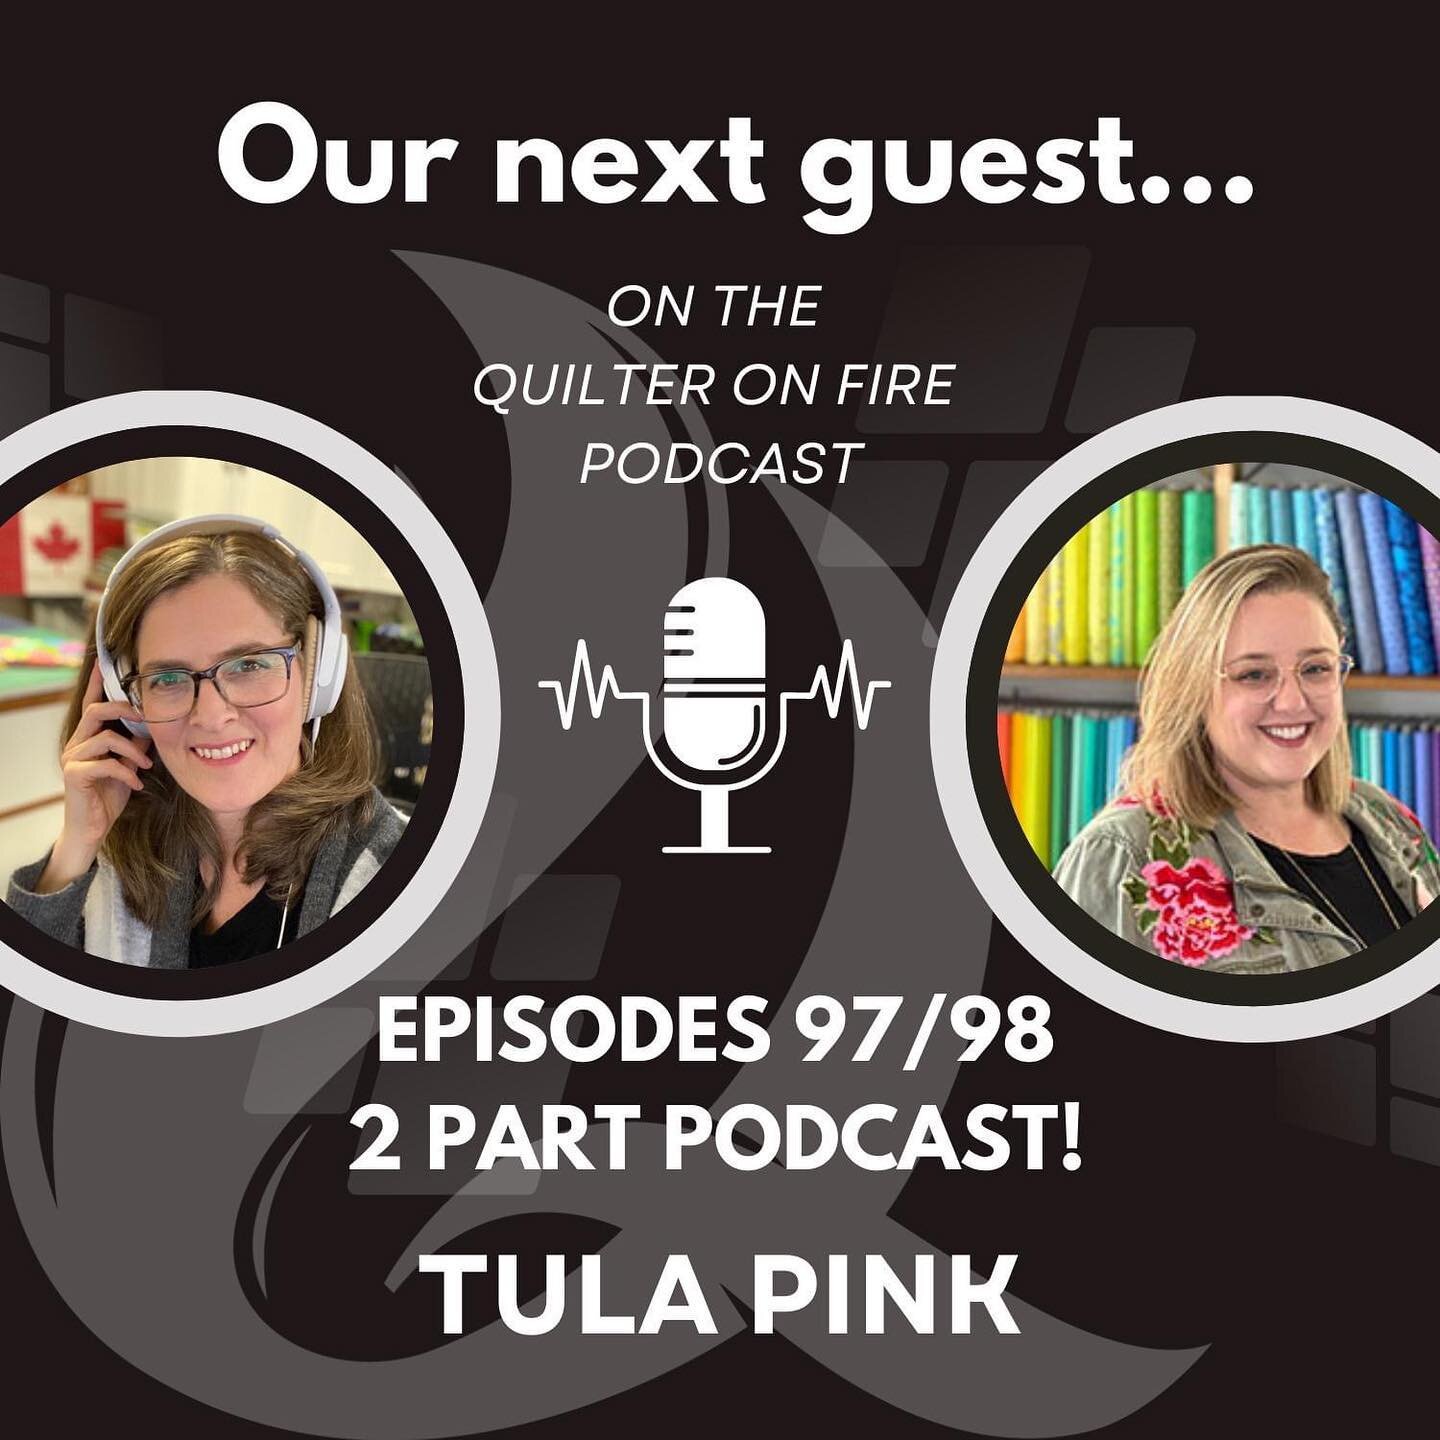 Paging all podcast listeners! I was a guest on the @quilteronfire Podcast and we recorded an amazing 3 hour conversation about all things Tula Pink. I was asked some fantastic questions and i&rsquo;m super excited for you all to hear it! Part 1 is up